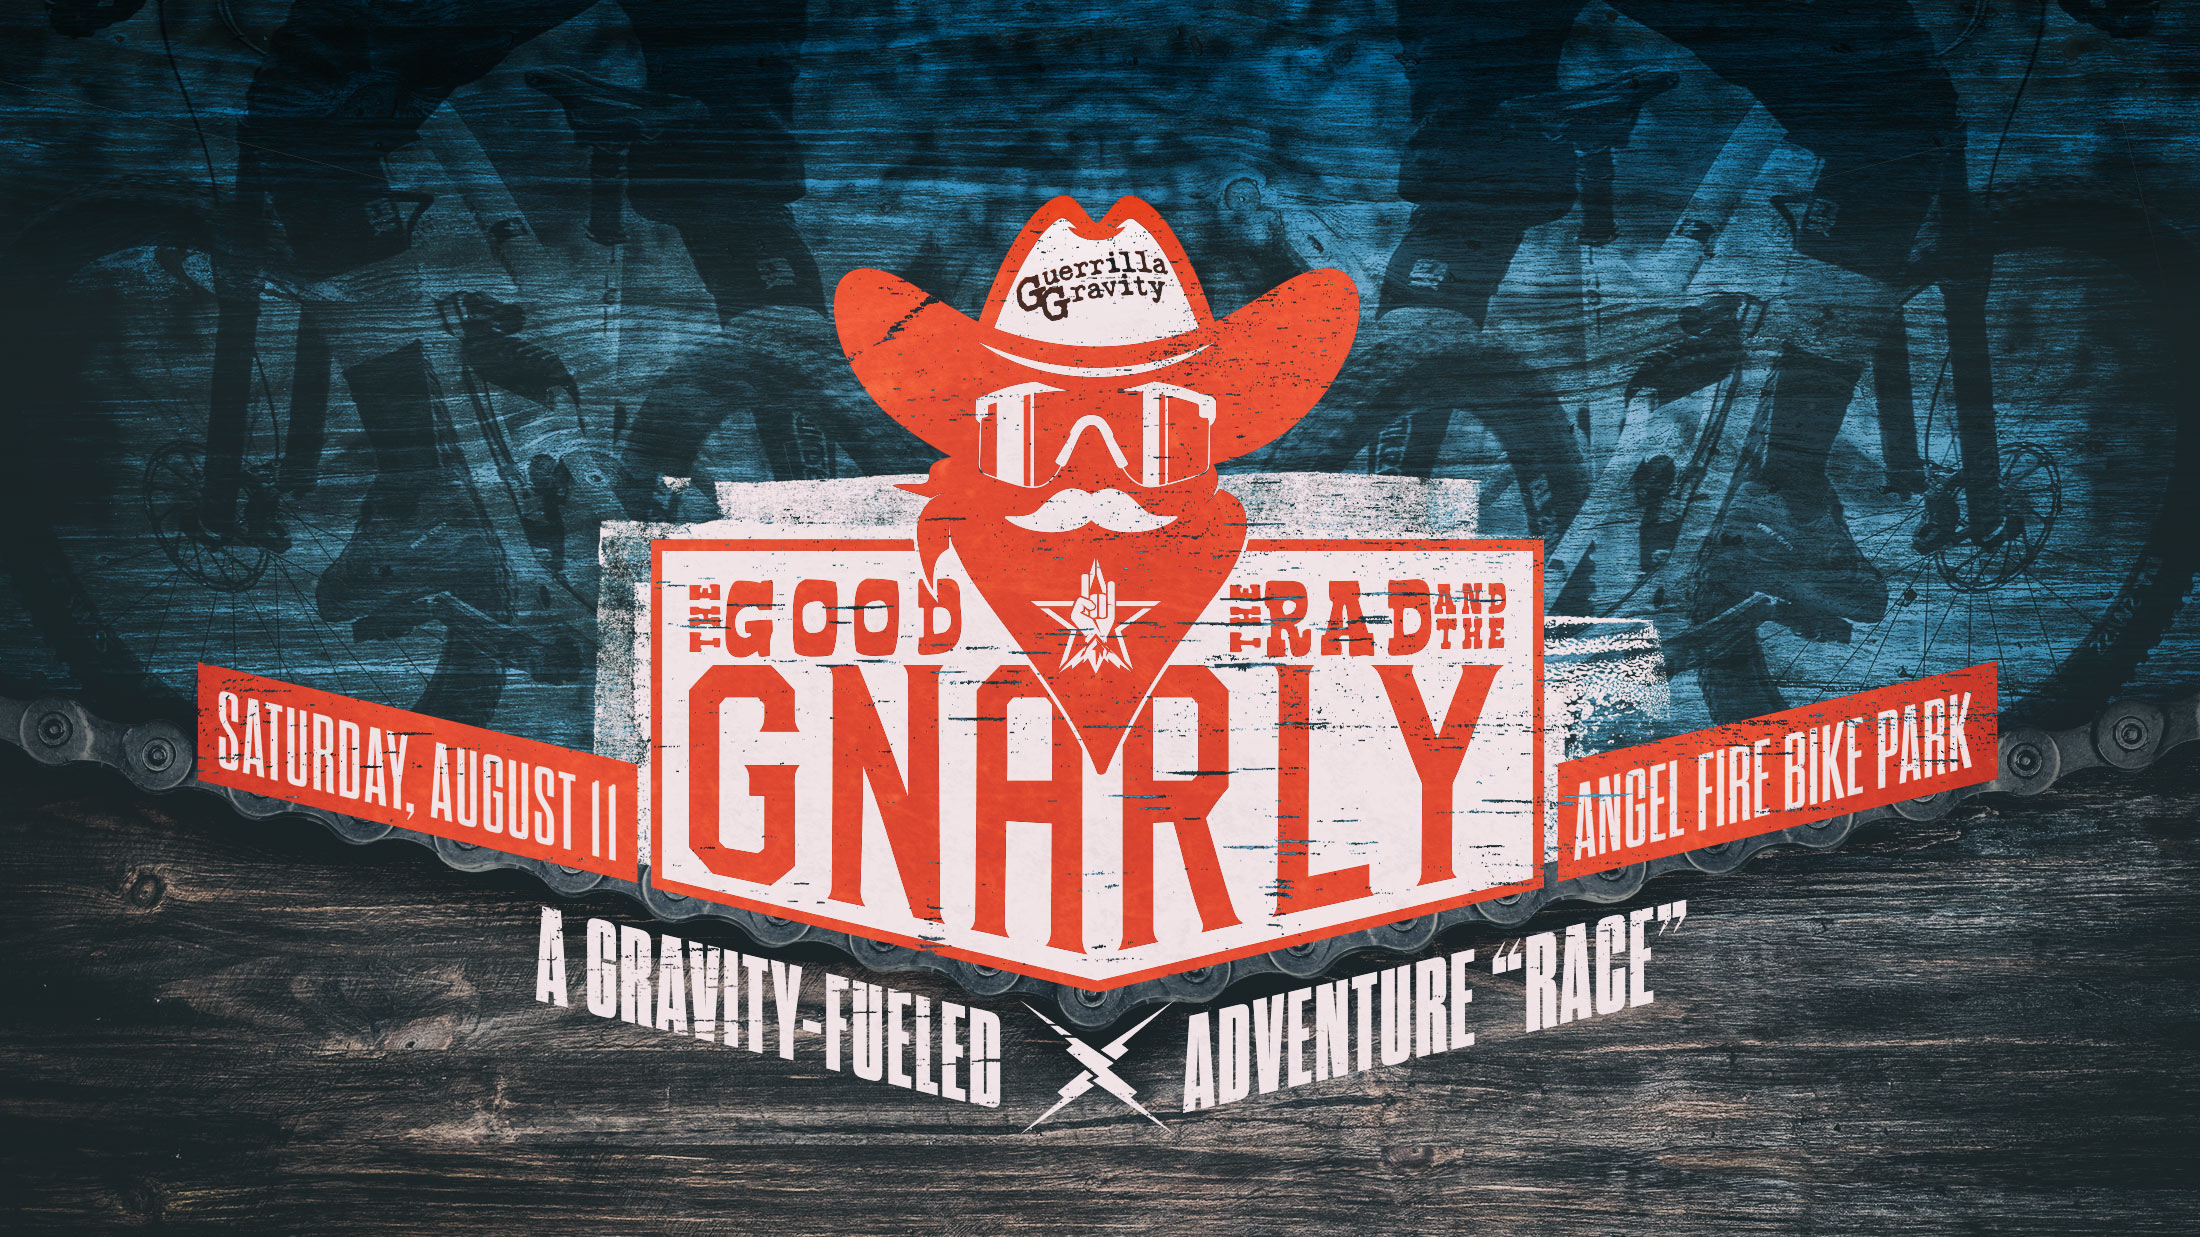 Guerrilla Gravity presents The Good, the Rad, and the Gnarly, a gravity-fueled adventure “race.”